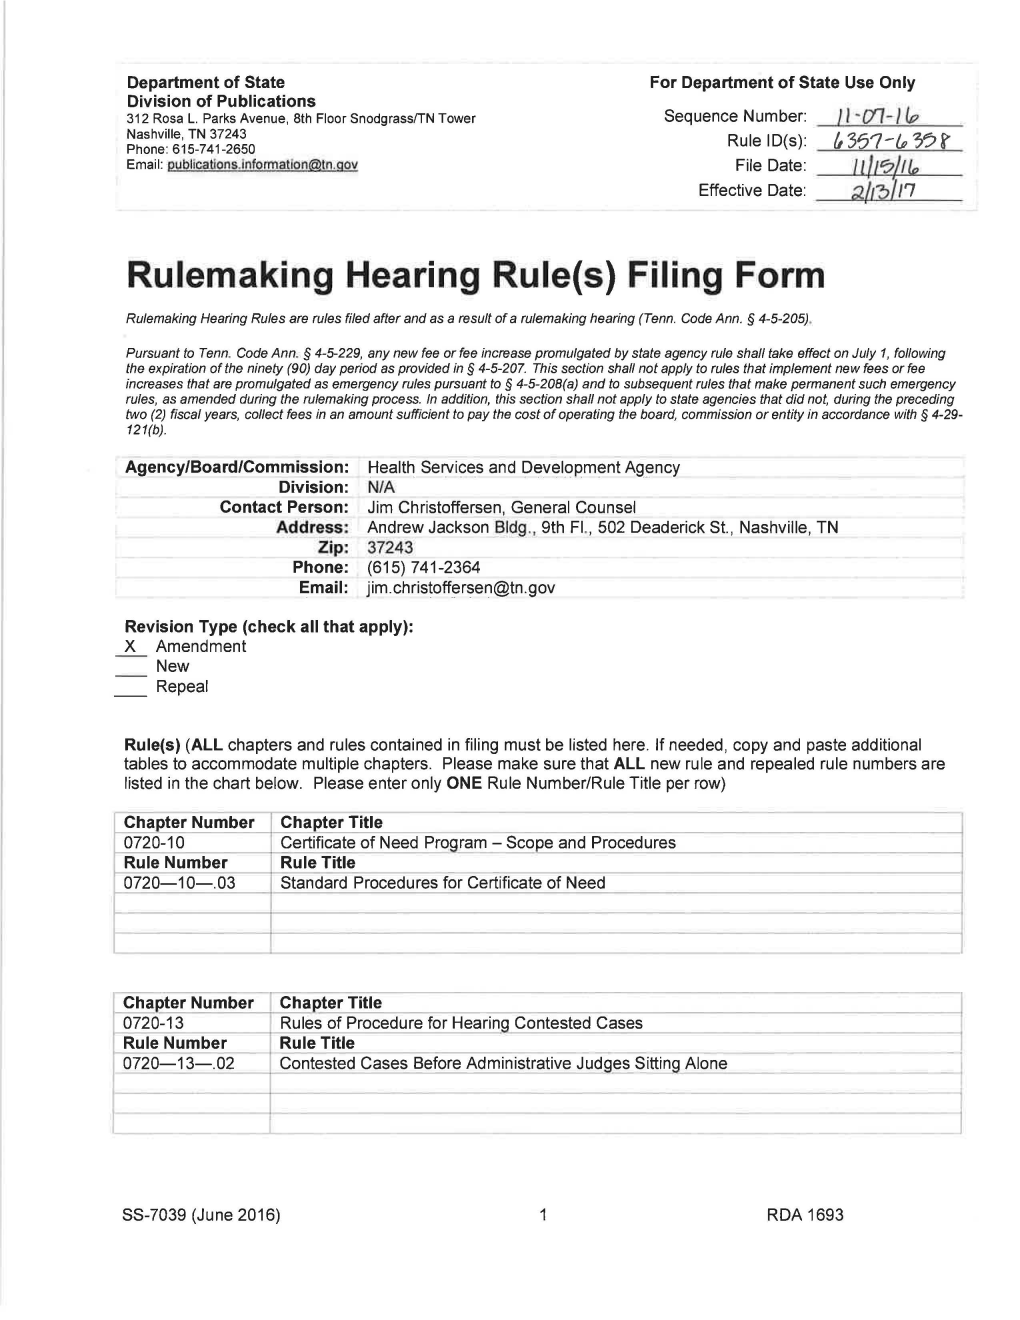 Rulemaking Hearing Rule(S) Filing Form